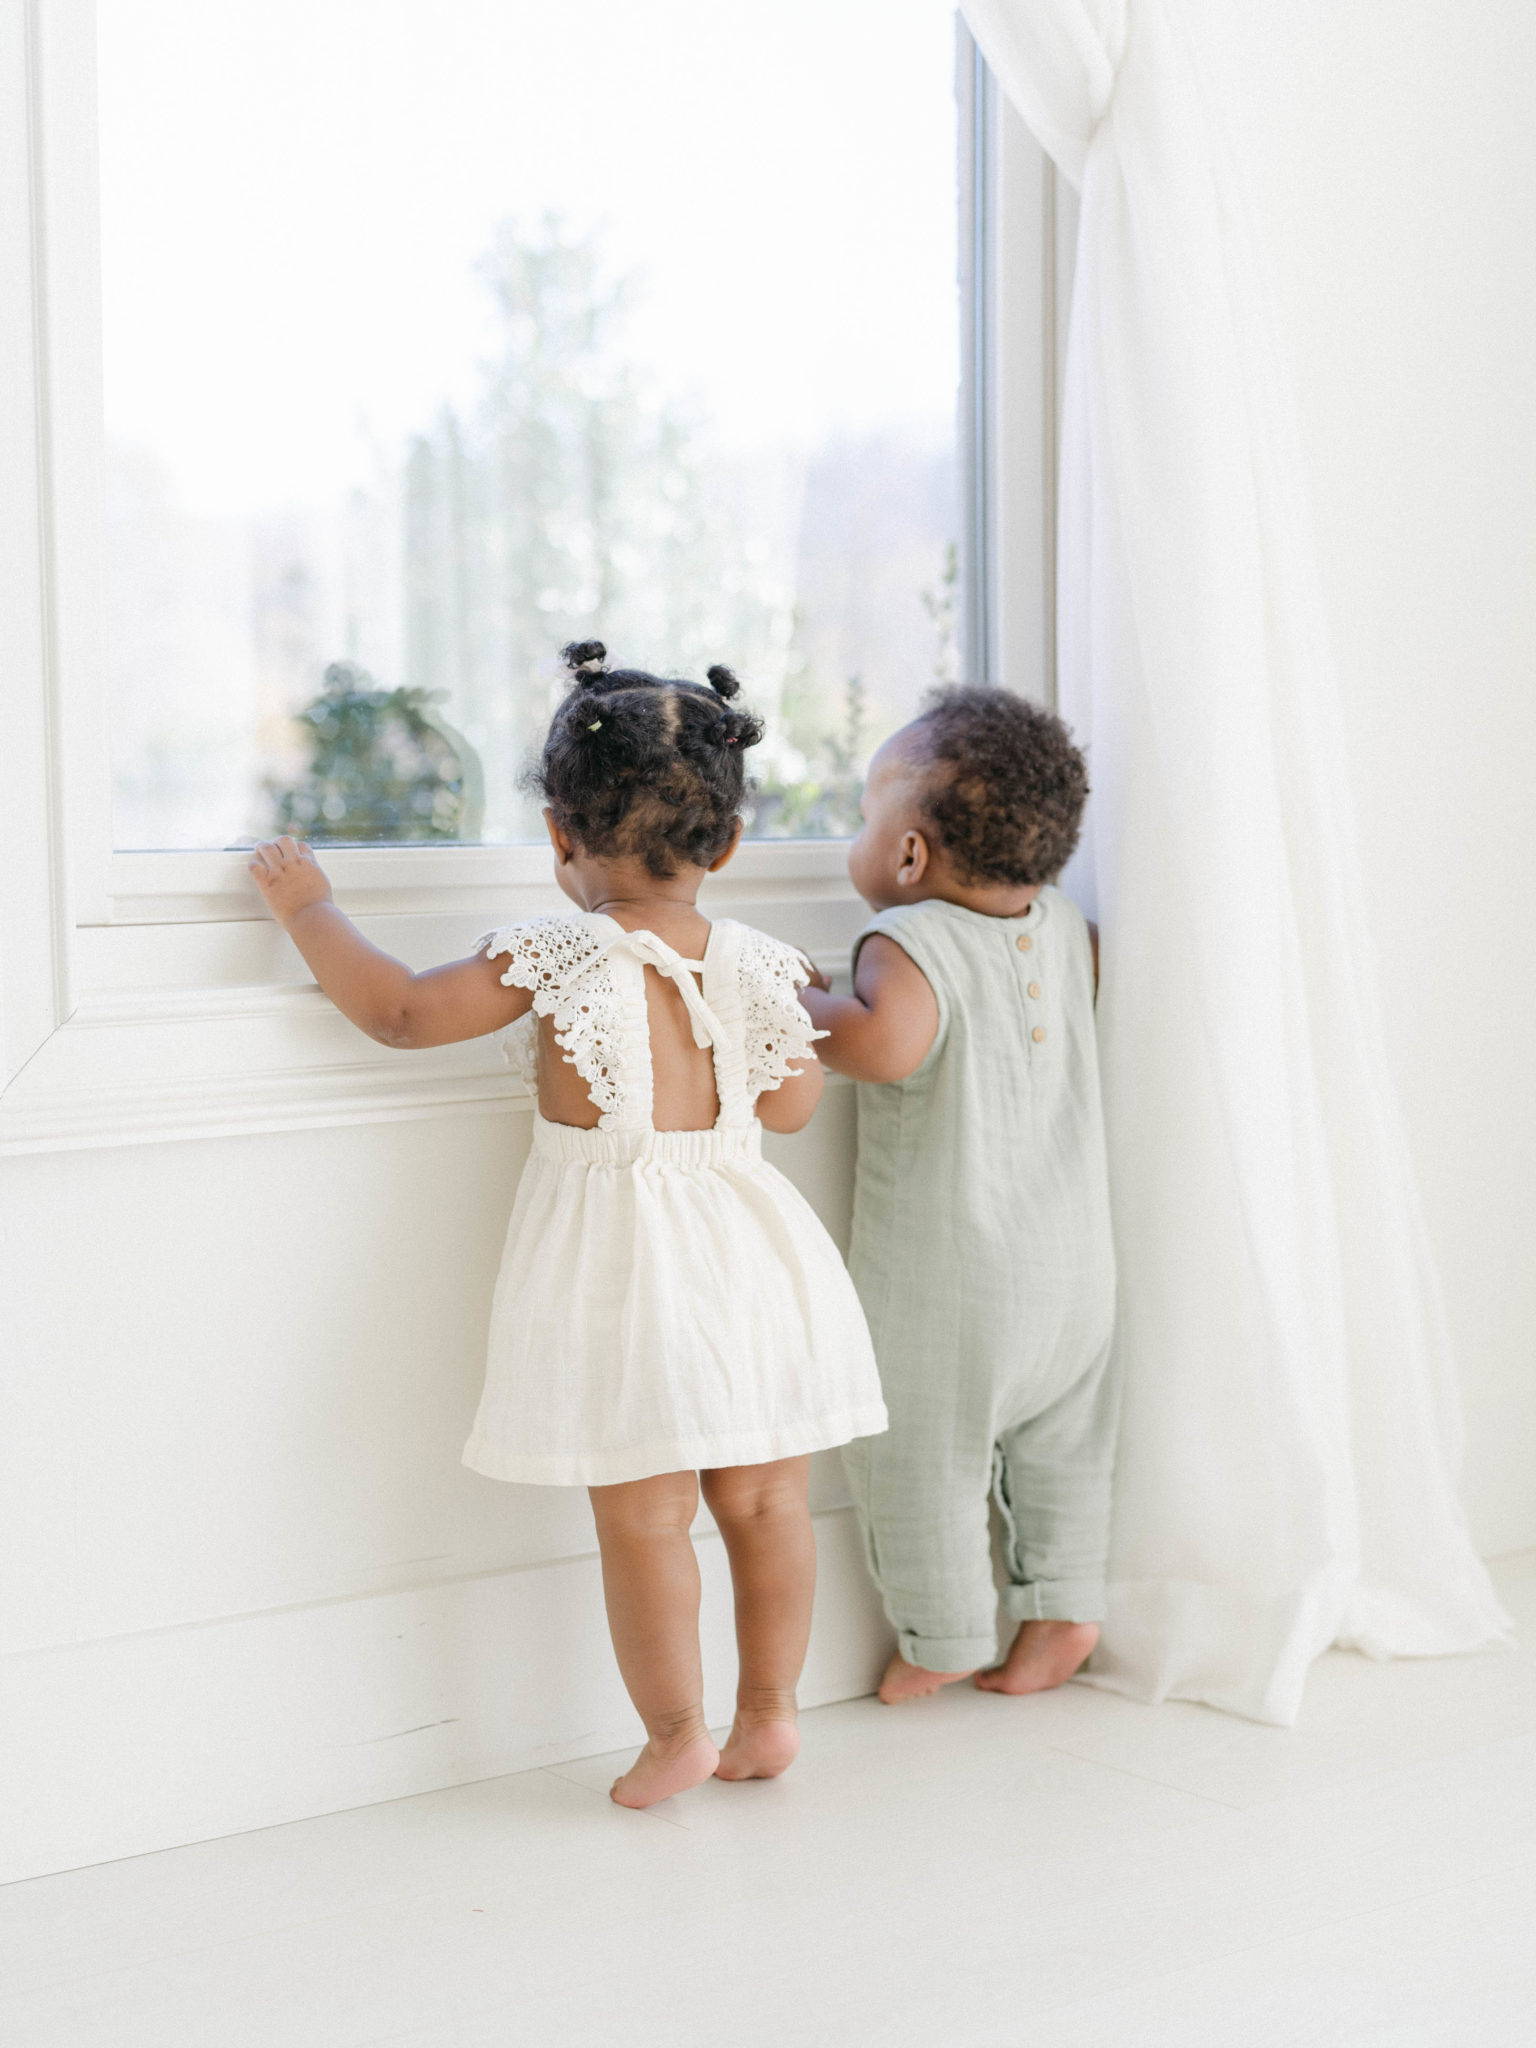 Rachel Bond Photography: Children by Window Edited Using REFINED I Preset Collection